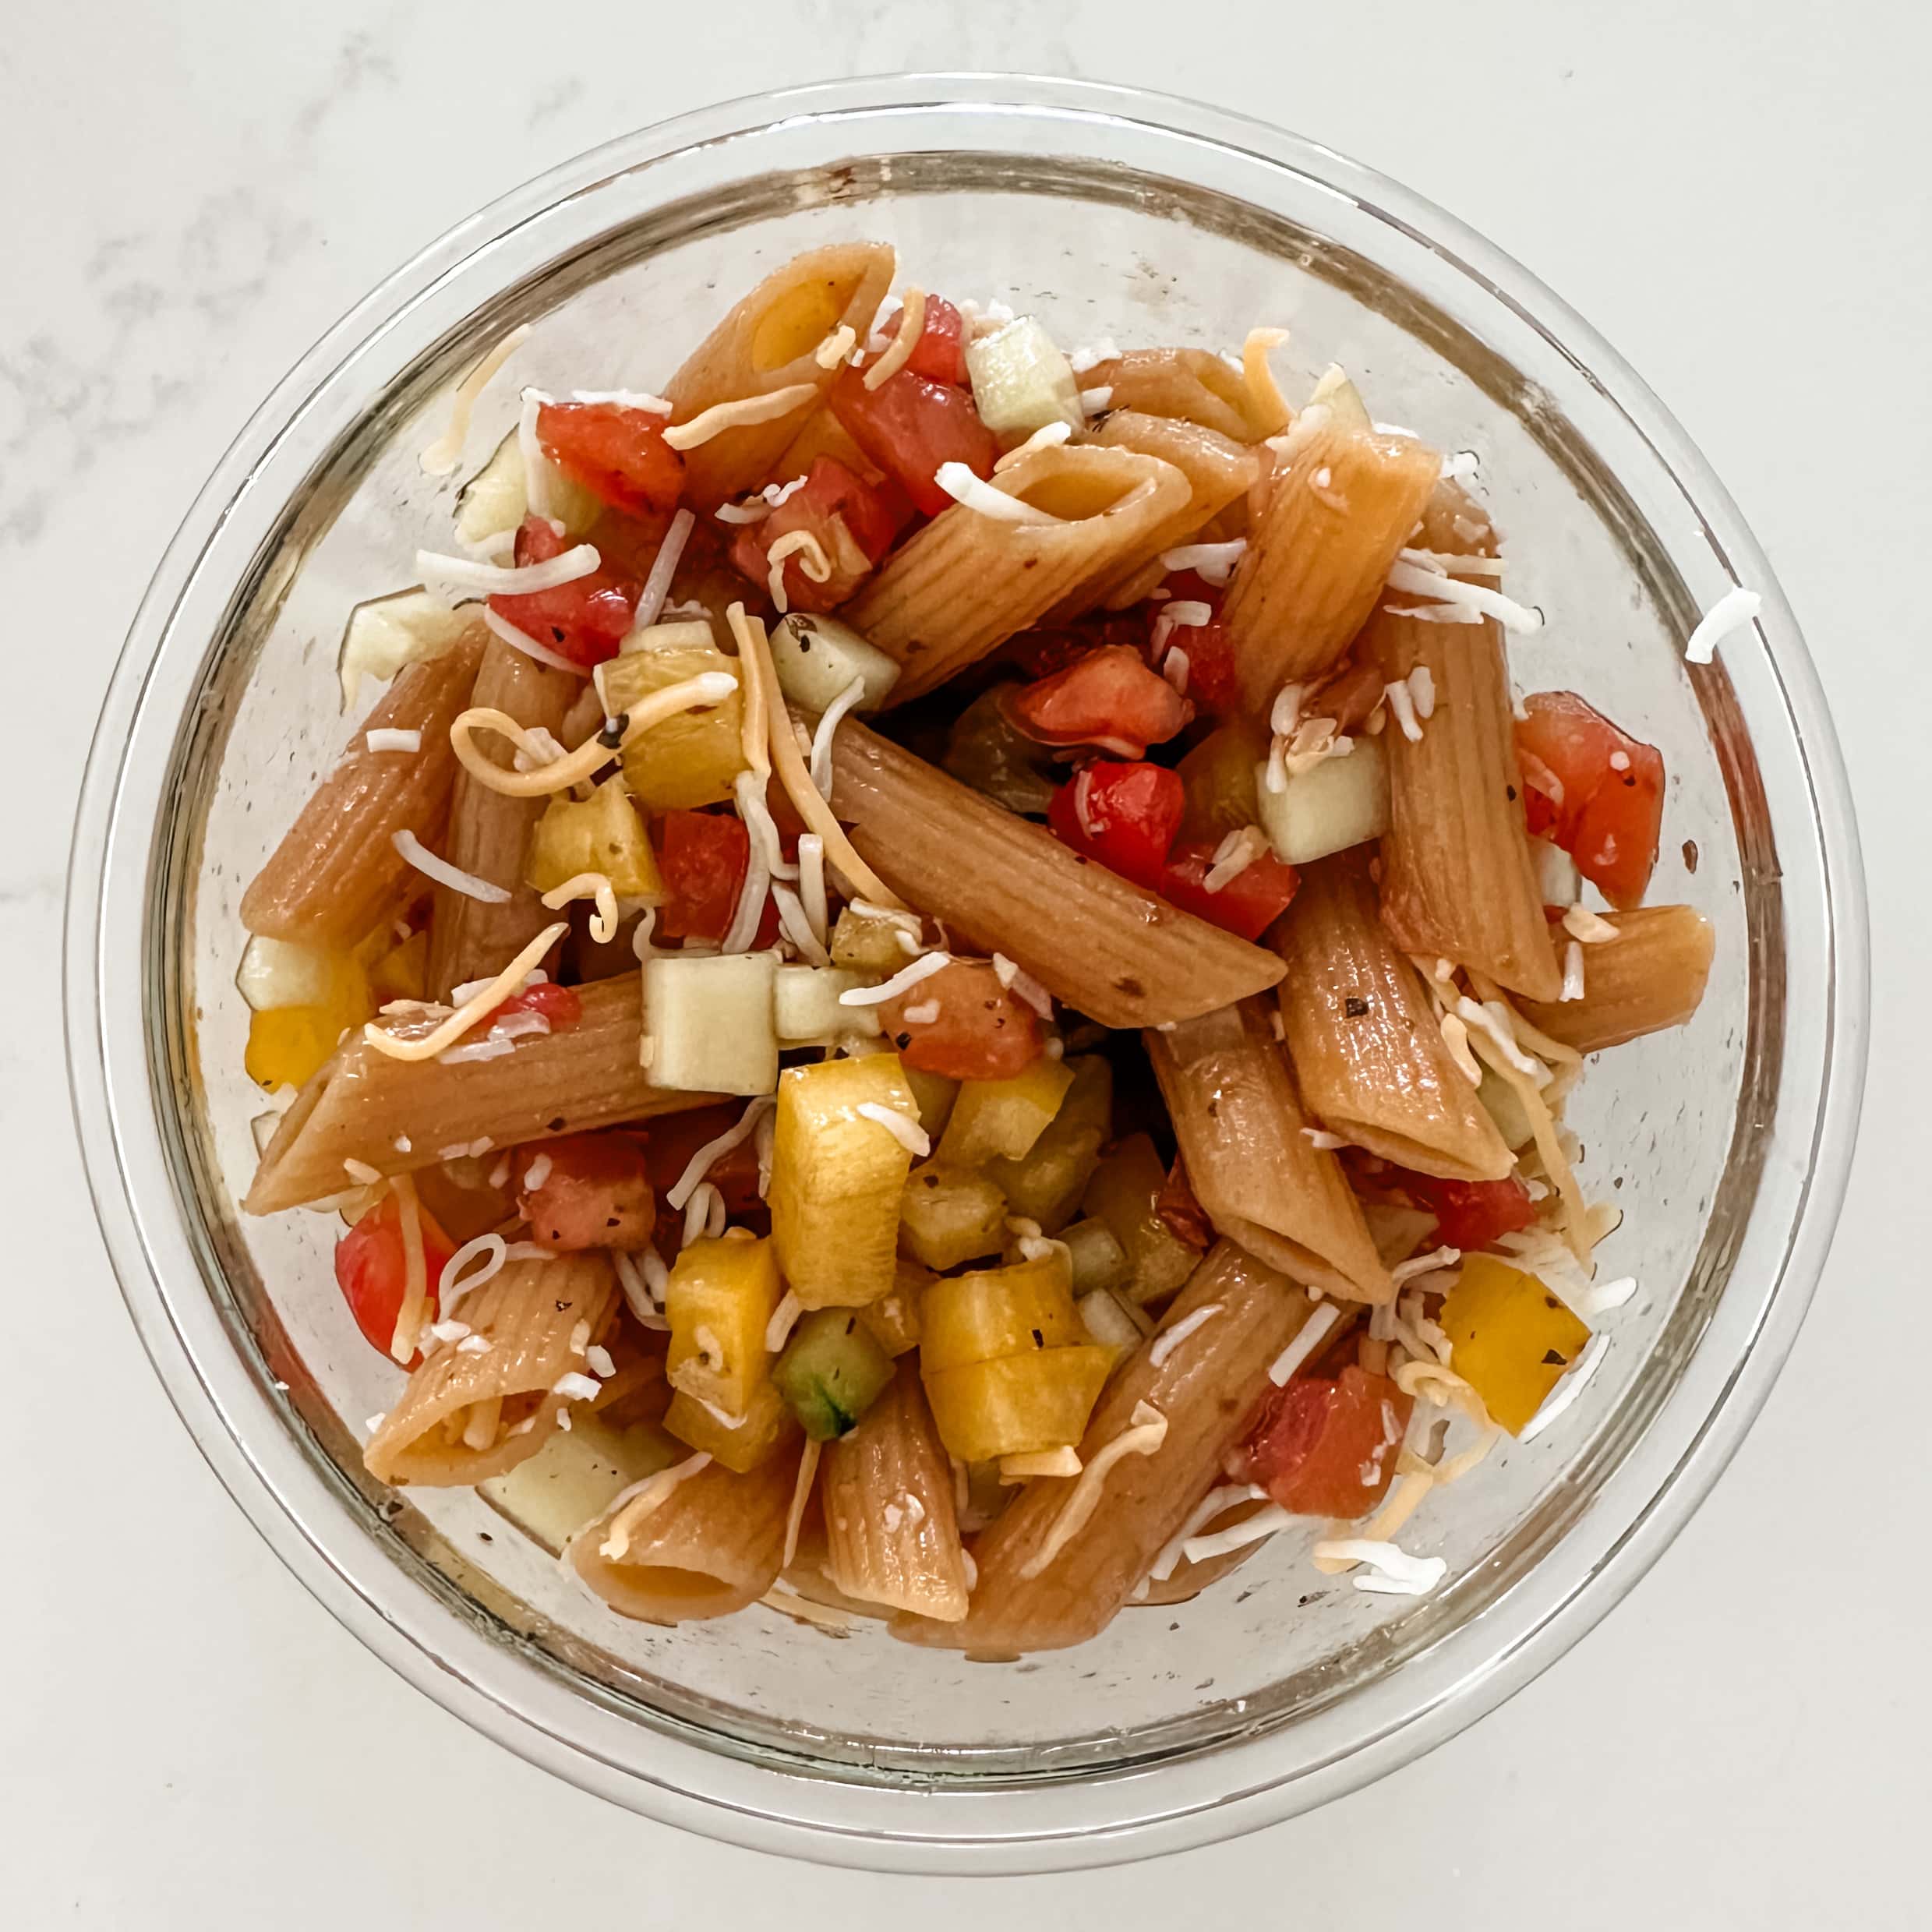 Clear round glass container filled with lentil pasta and veggies with a vinegarette.